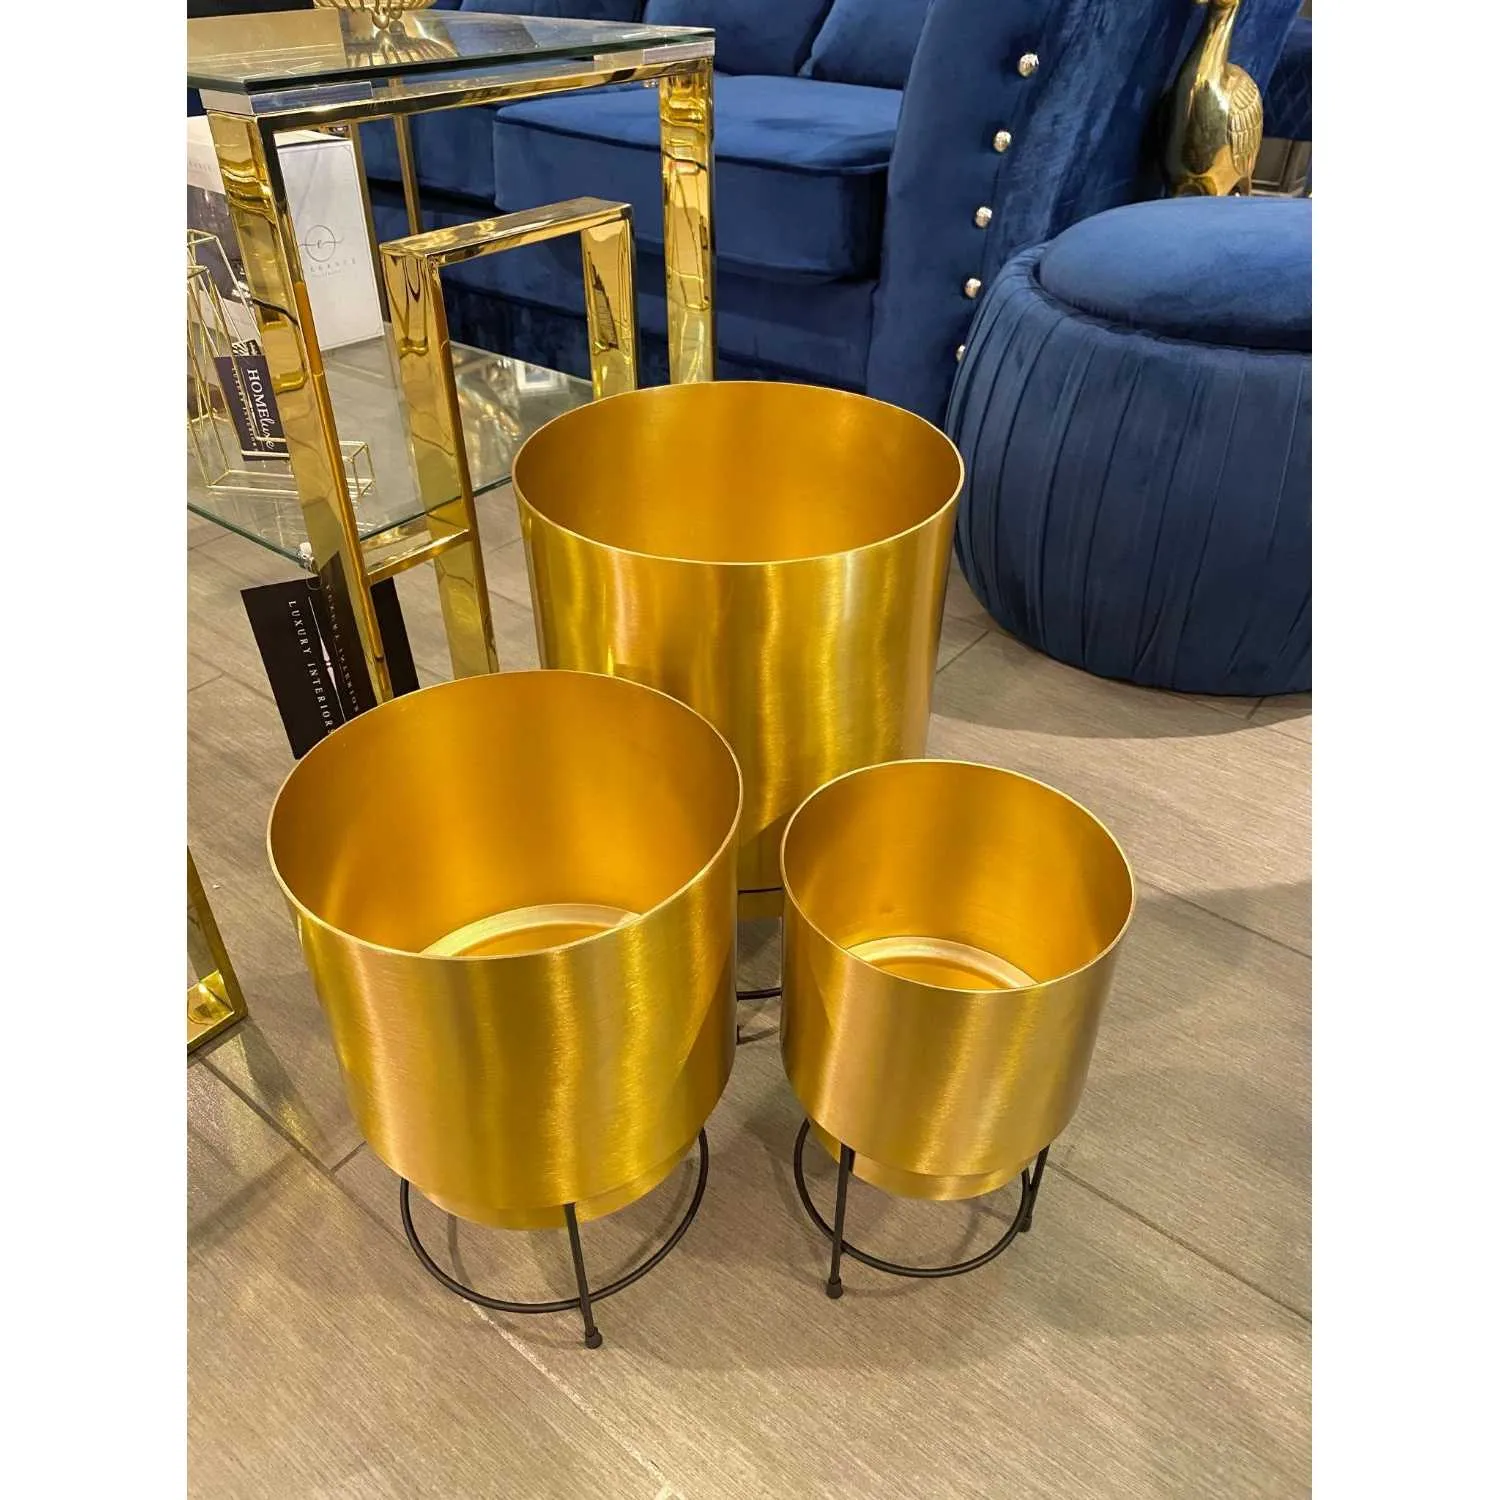 Set Of 3 Gold Planters With Black Stands